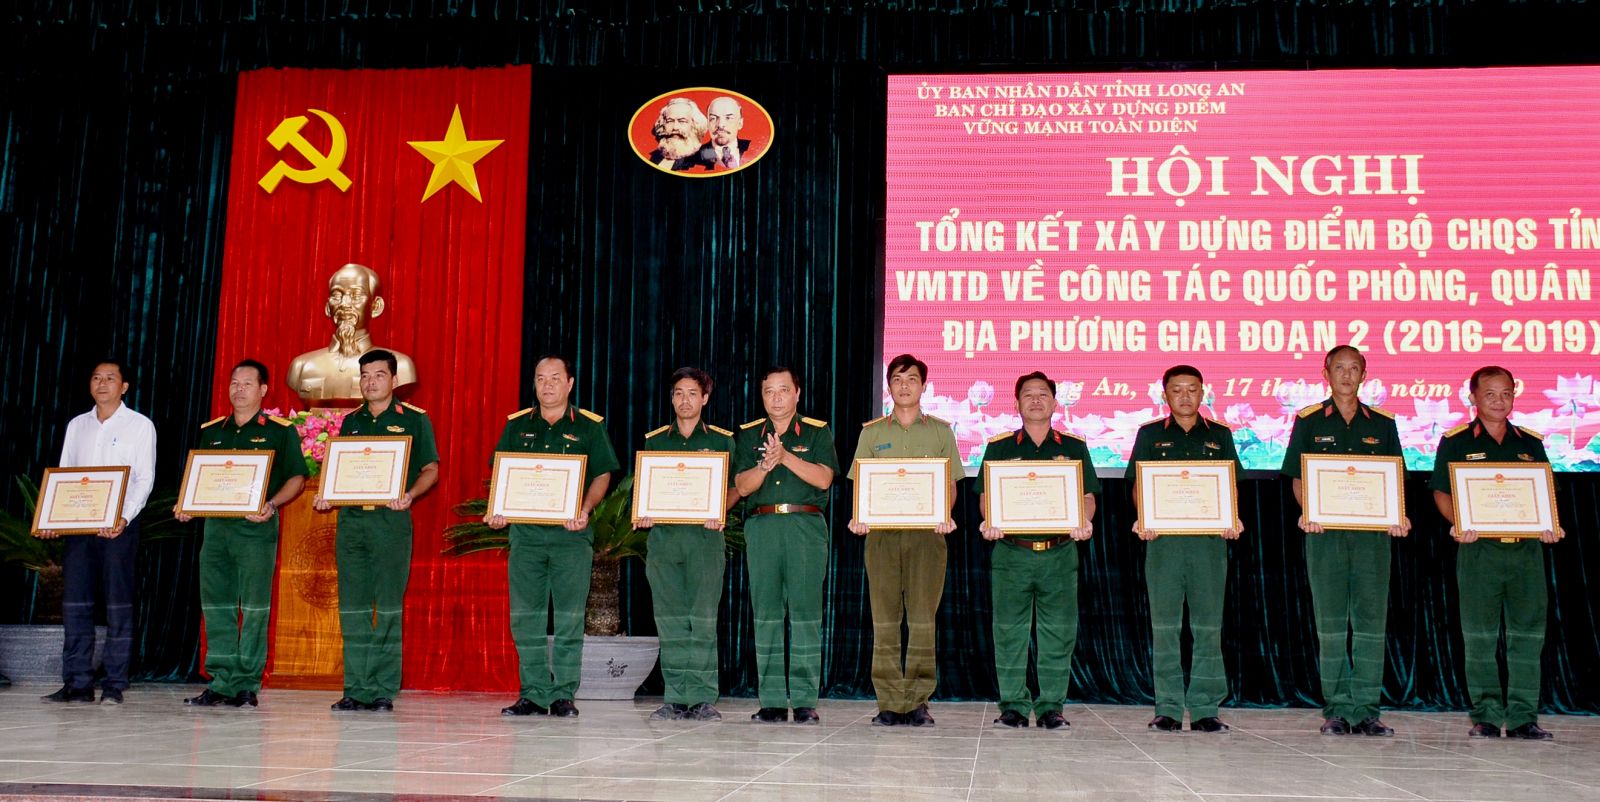 The Commander of the Provincial Military Command - Tran Van Trai presented certificates of merit to 60 collectives and individuals with outstanding achievements in building the typical model of the comprehensive strong Military Command for local defense and military work.